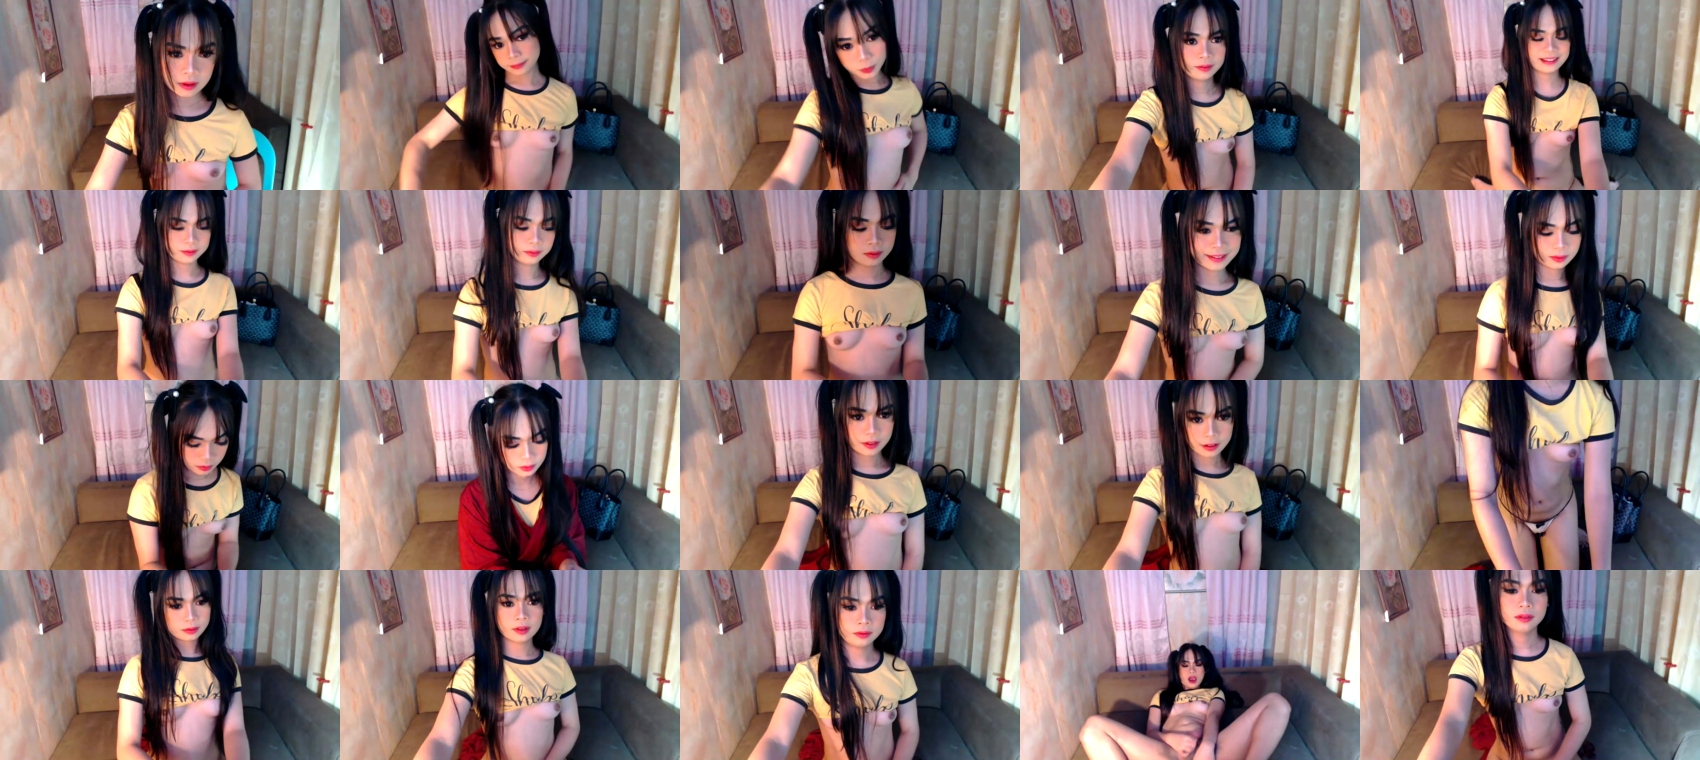 gorgeoustransgirl sexykitty CAM SHOW @ Chaturbate 27-12-2021